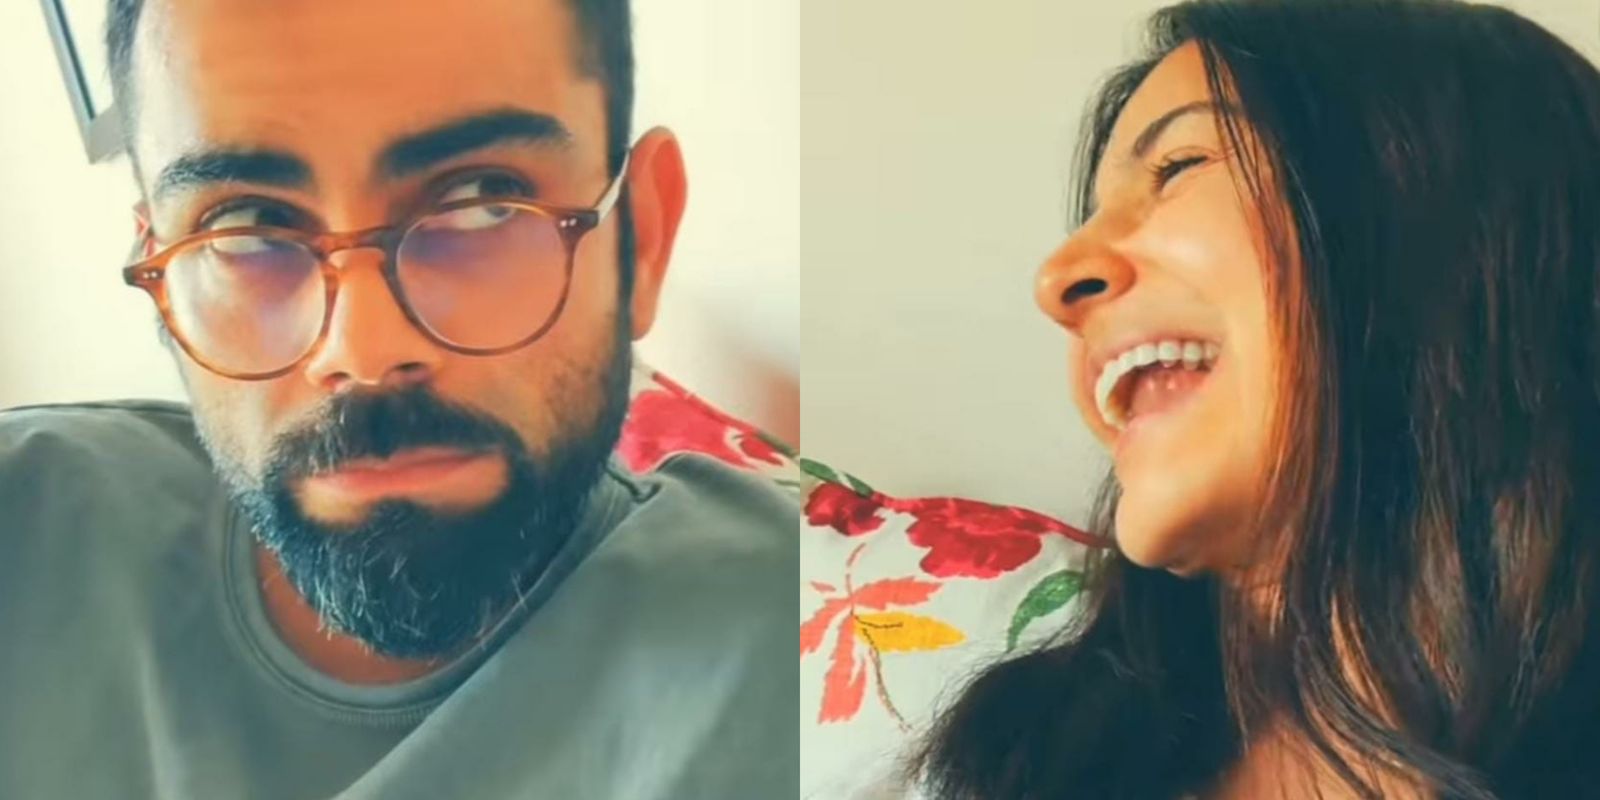 Anushka Sharma Acts Like An Over-Enthusiastic Fan For Husband Virat Kohli In This Hilarious Video; Watch